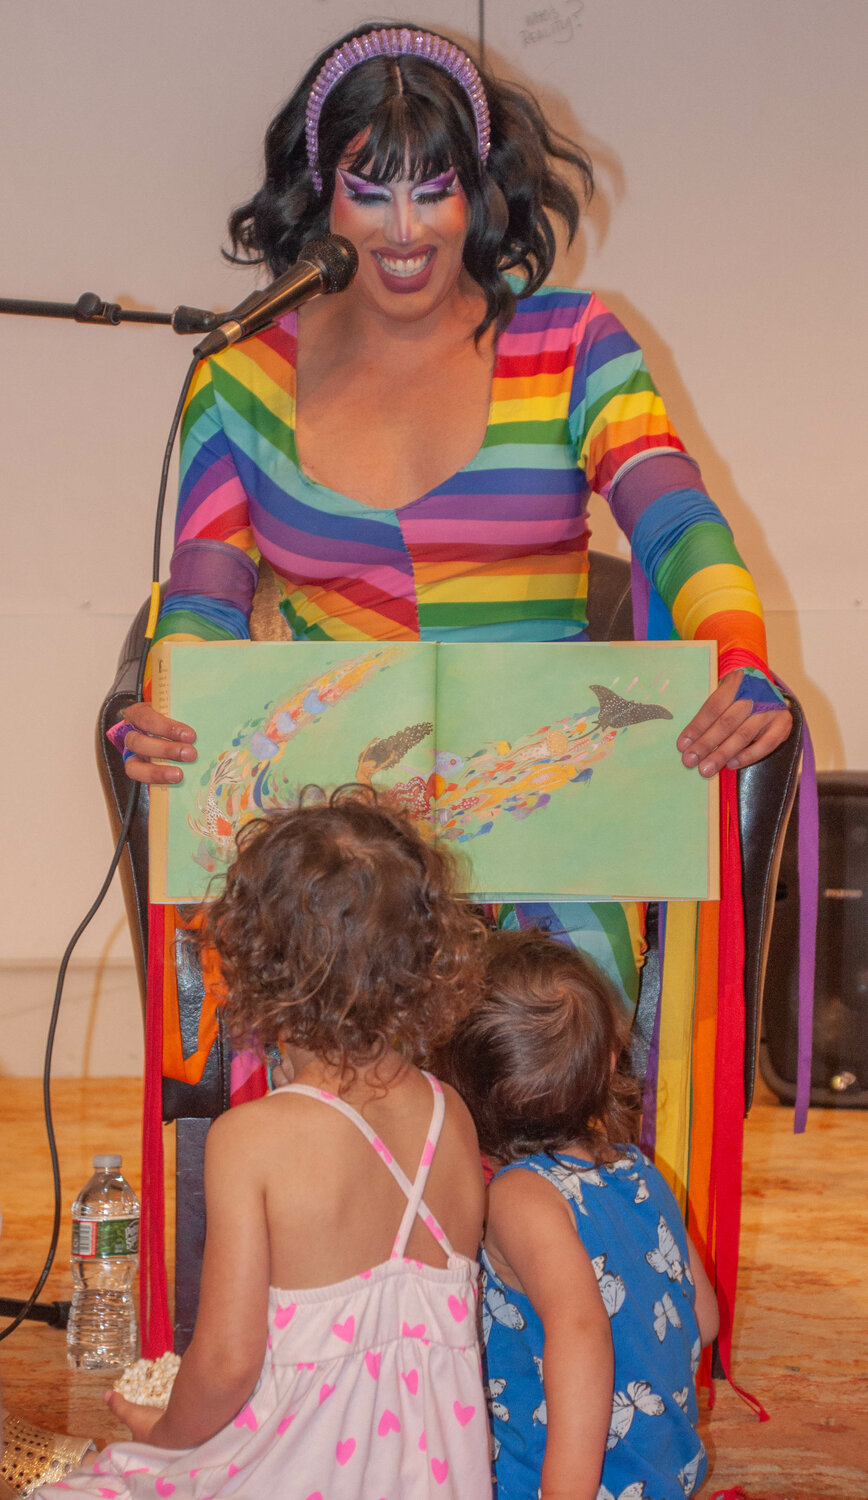 I'm scratching my head over parents’ concerns about clownishly attired drag queens reading storybooks to kids. If Bozo can do it, why can’t Lyra Vega?